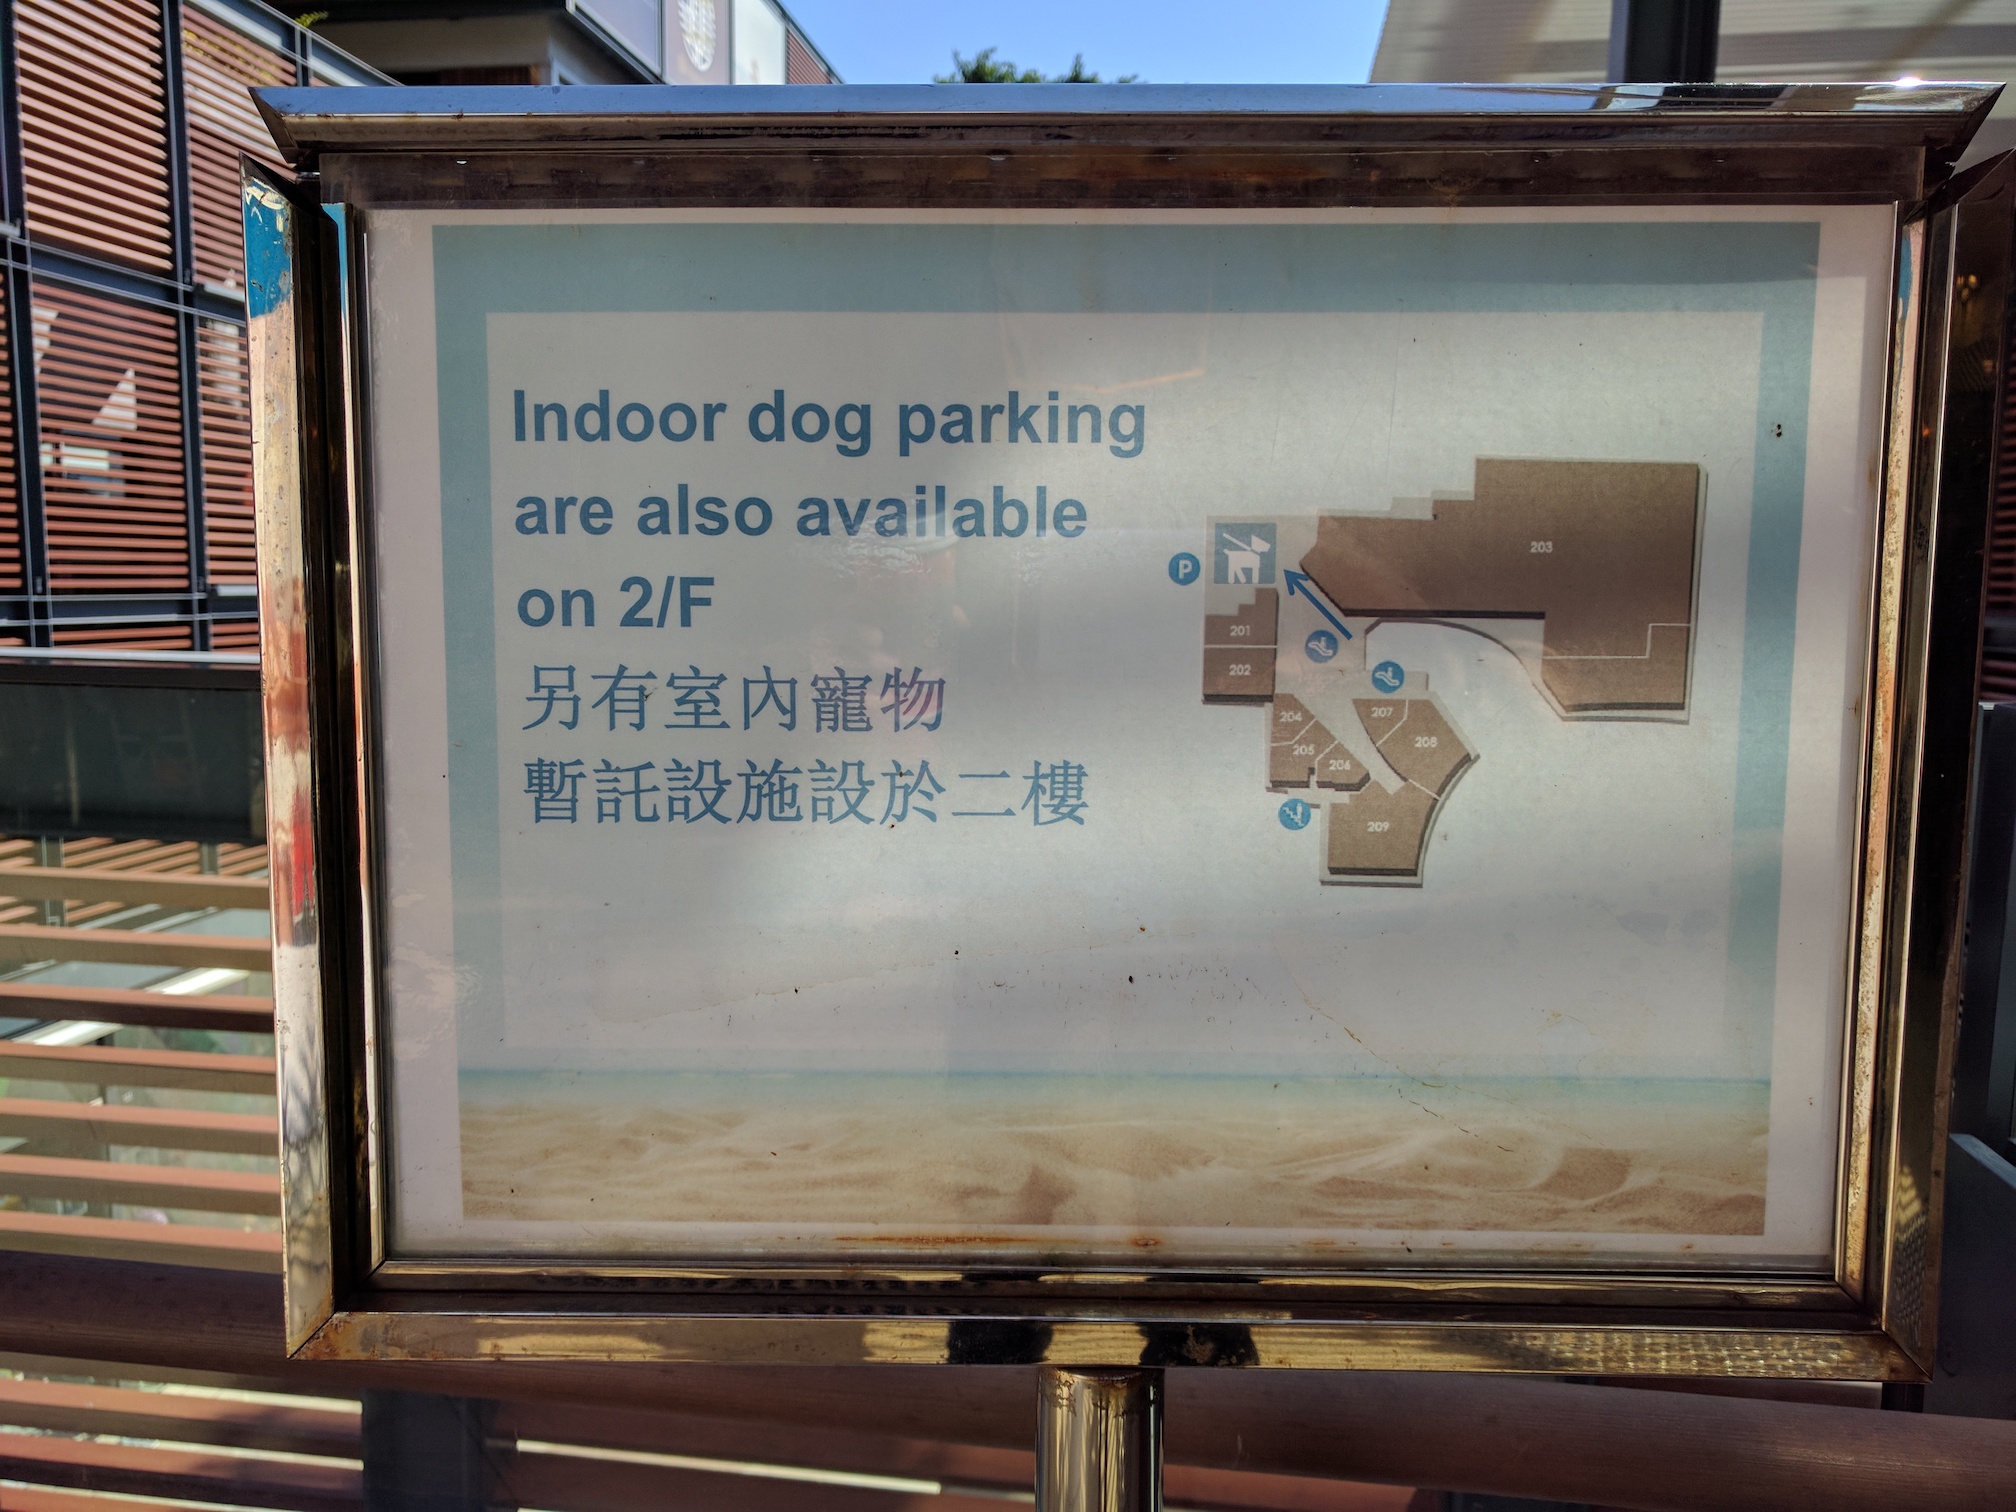 I'm finding Hong Kong is a very dog friendly place